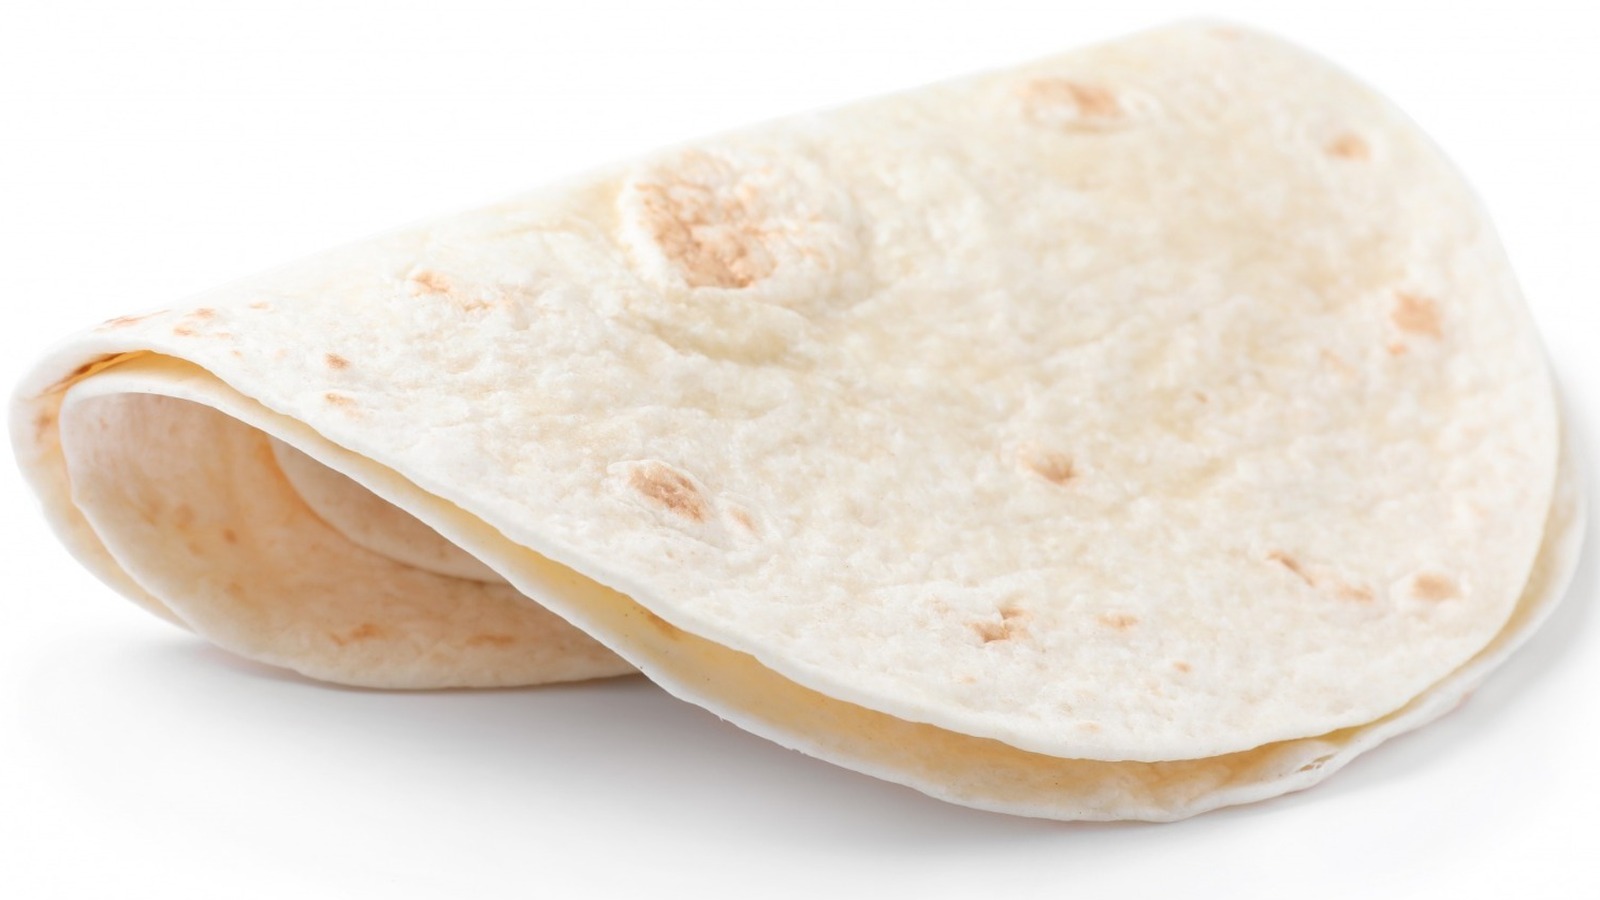 What You Need To Know About The Flour Tortilla Recall Update